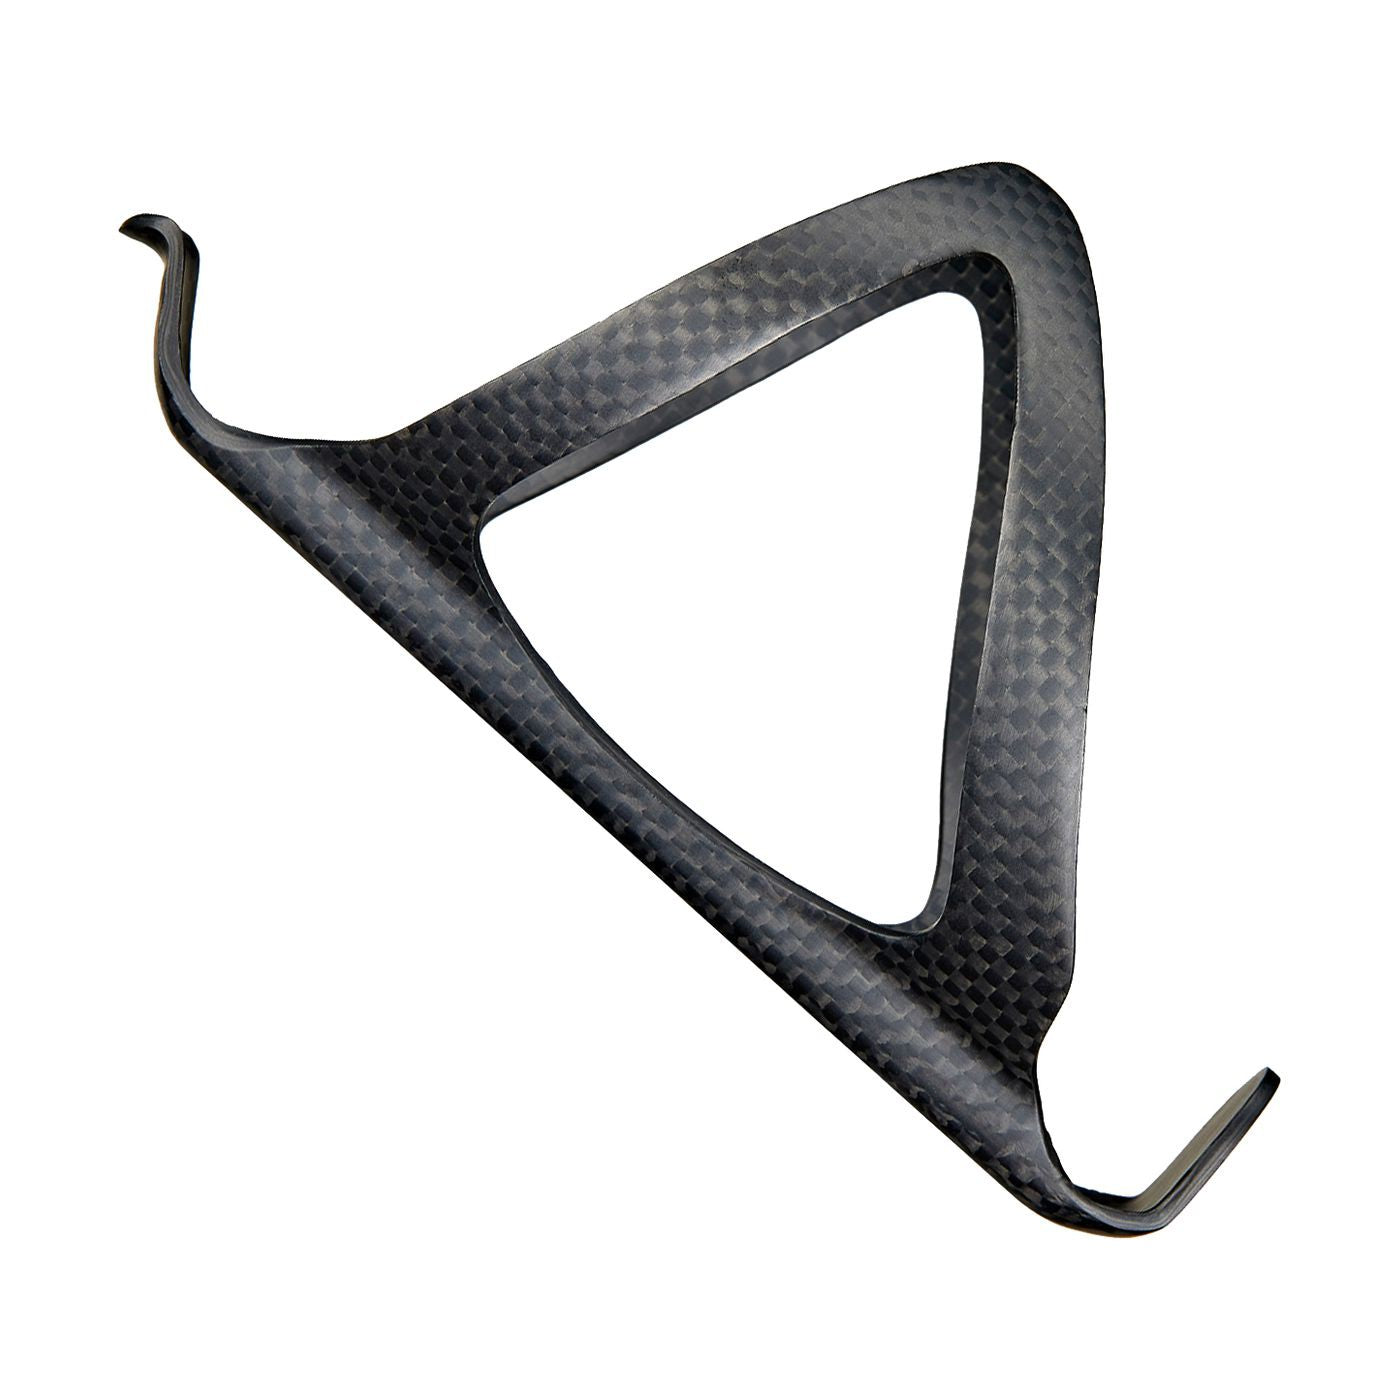 Supacaz Fly Carbon Bottle Cage - Cages - Bicycle Warehouse